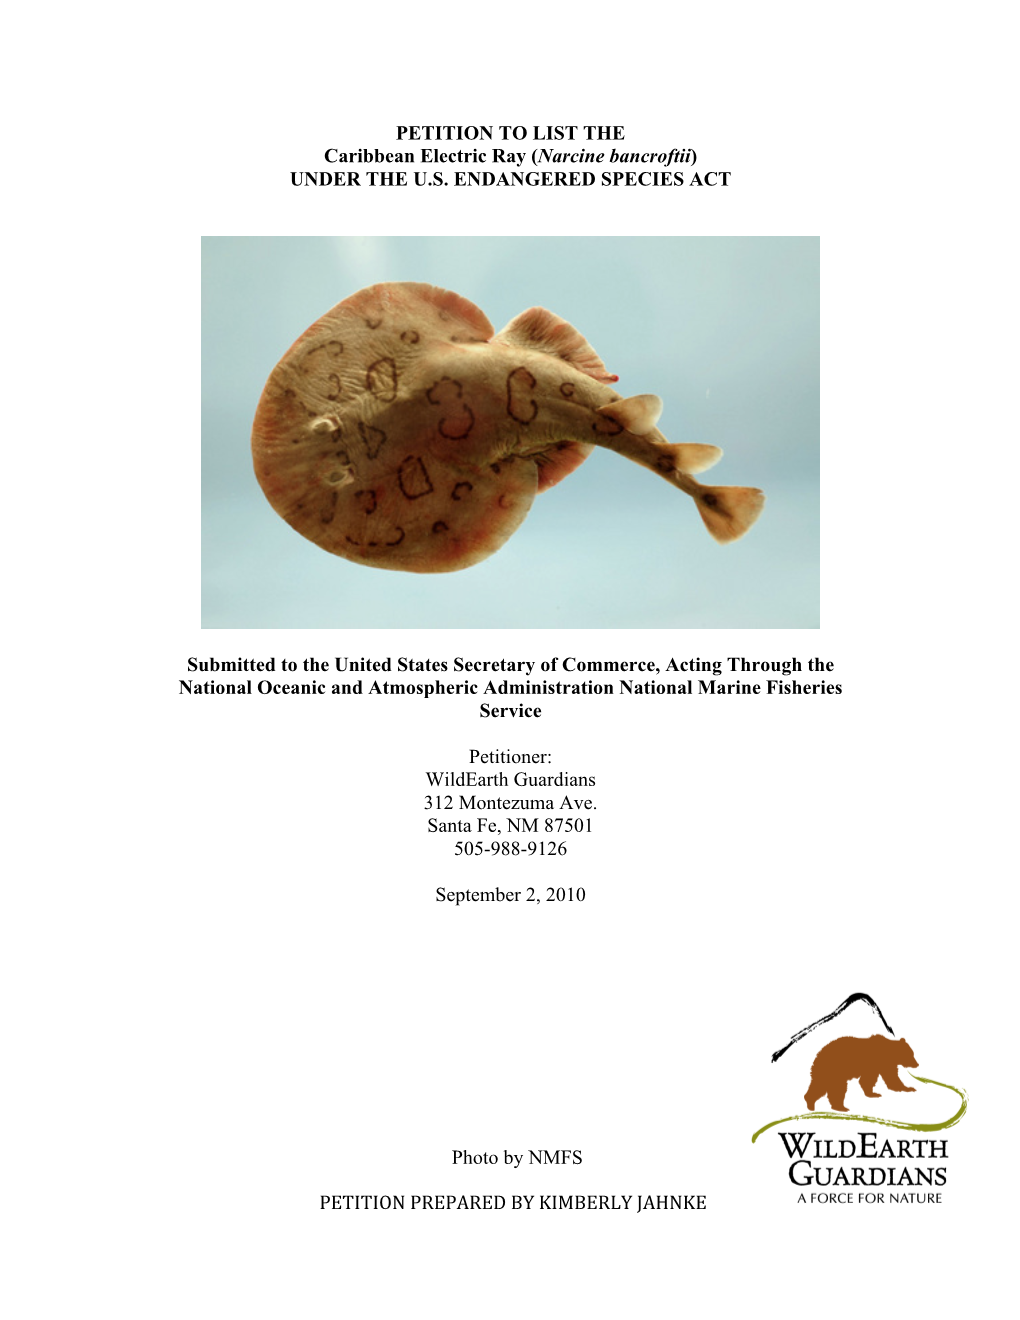 Wildearth Guardians Petition to NMFS for Caribbean Electric Ray